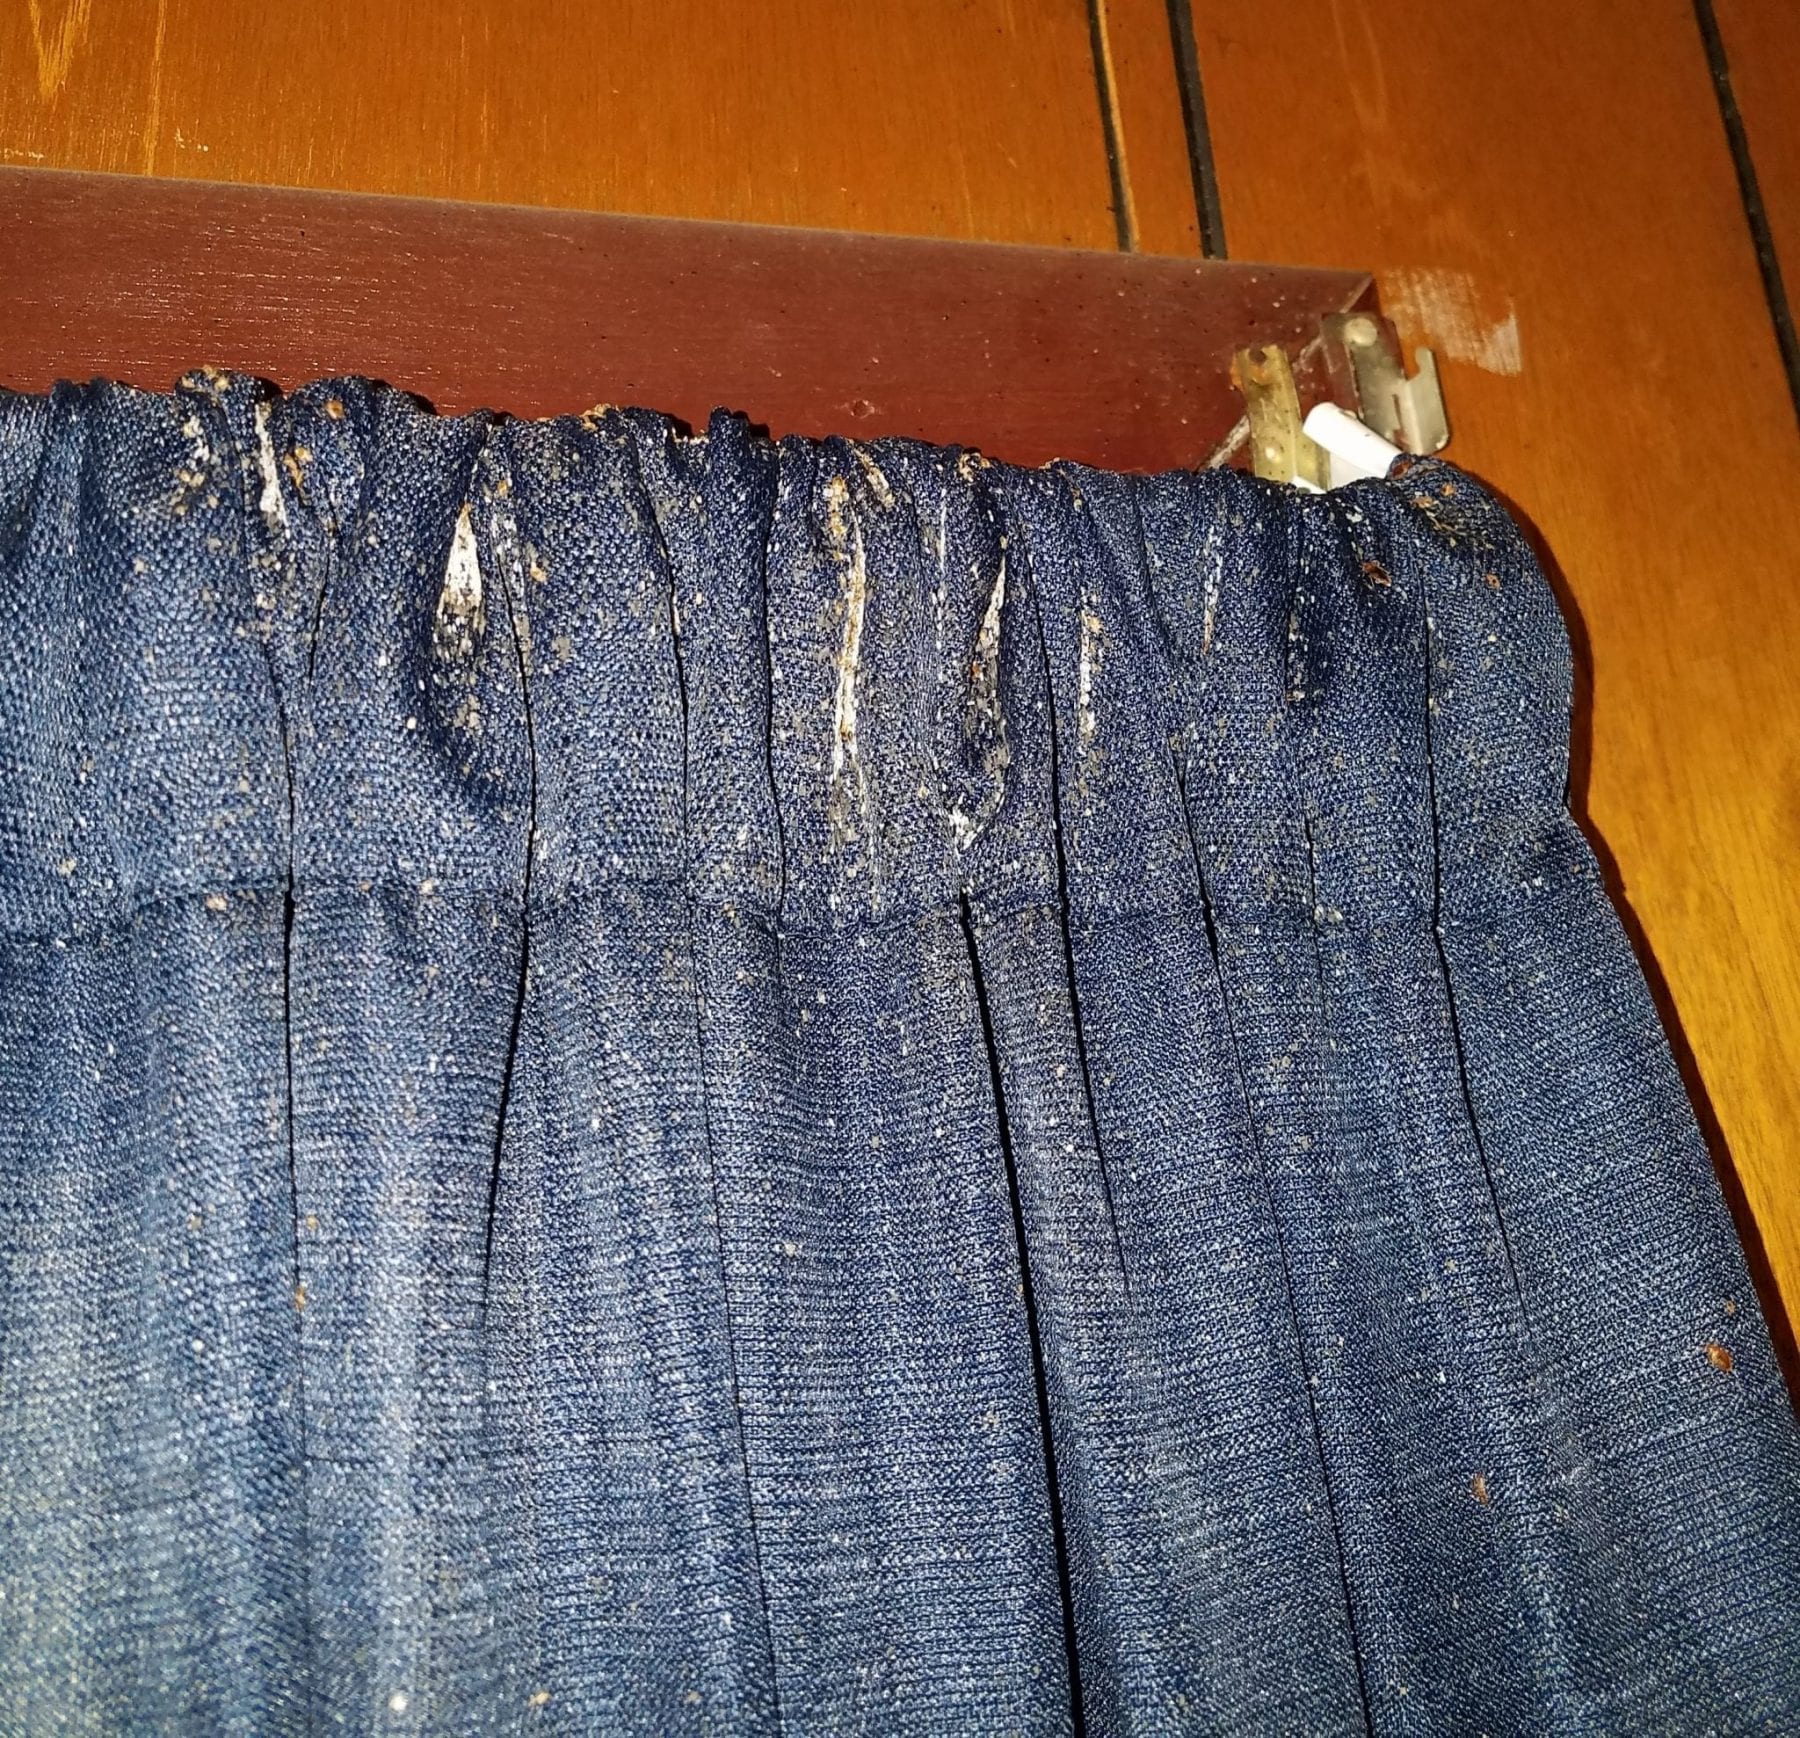 Bed bugs in linings of blue curtains